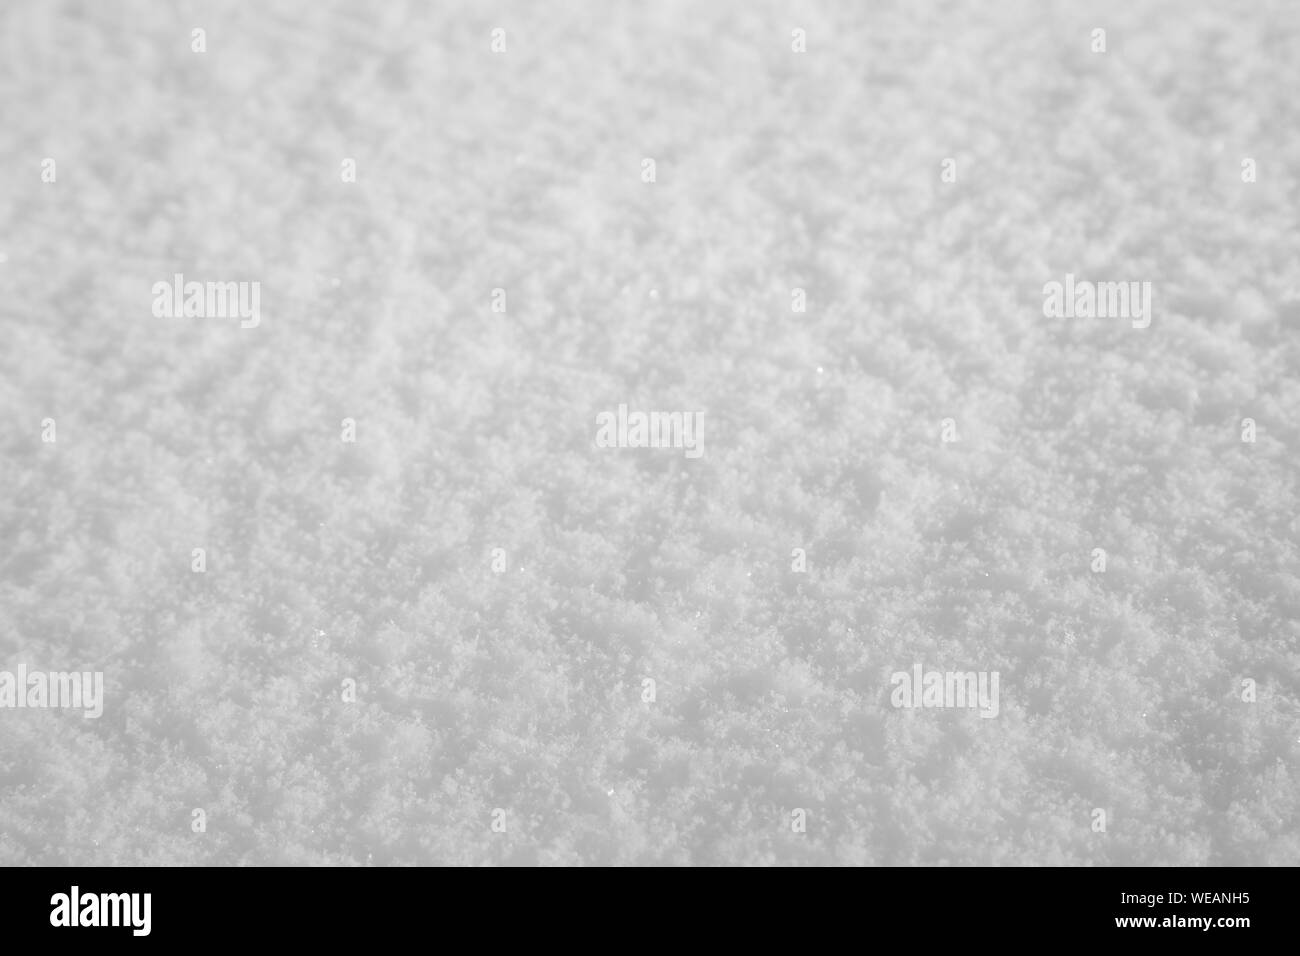 snow texture with perspective or white grain pattren abstract background Stock Photo